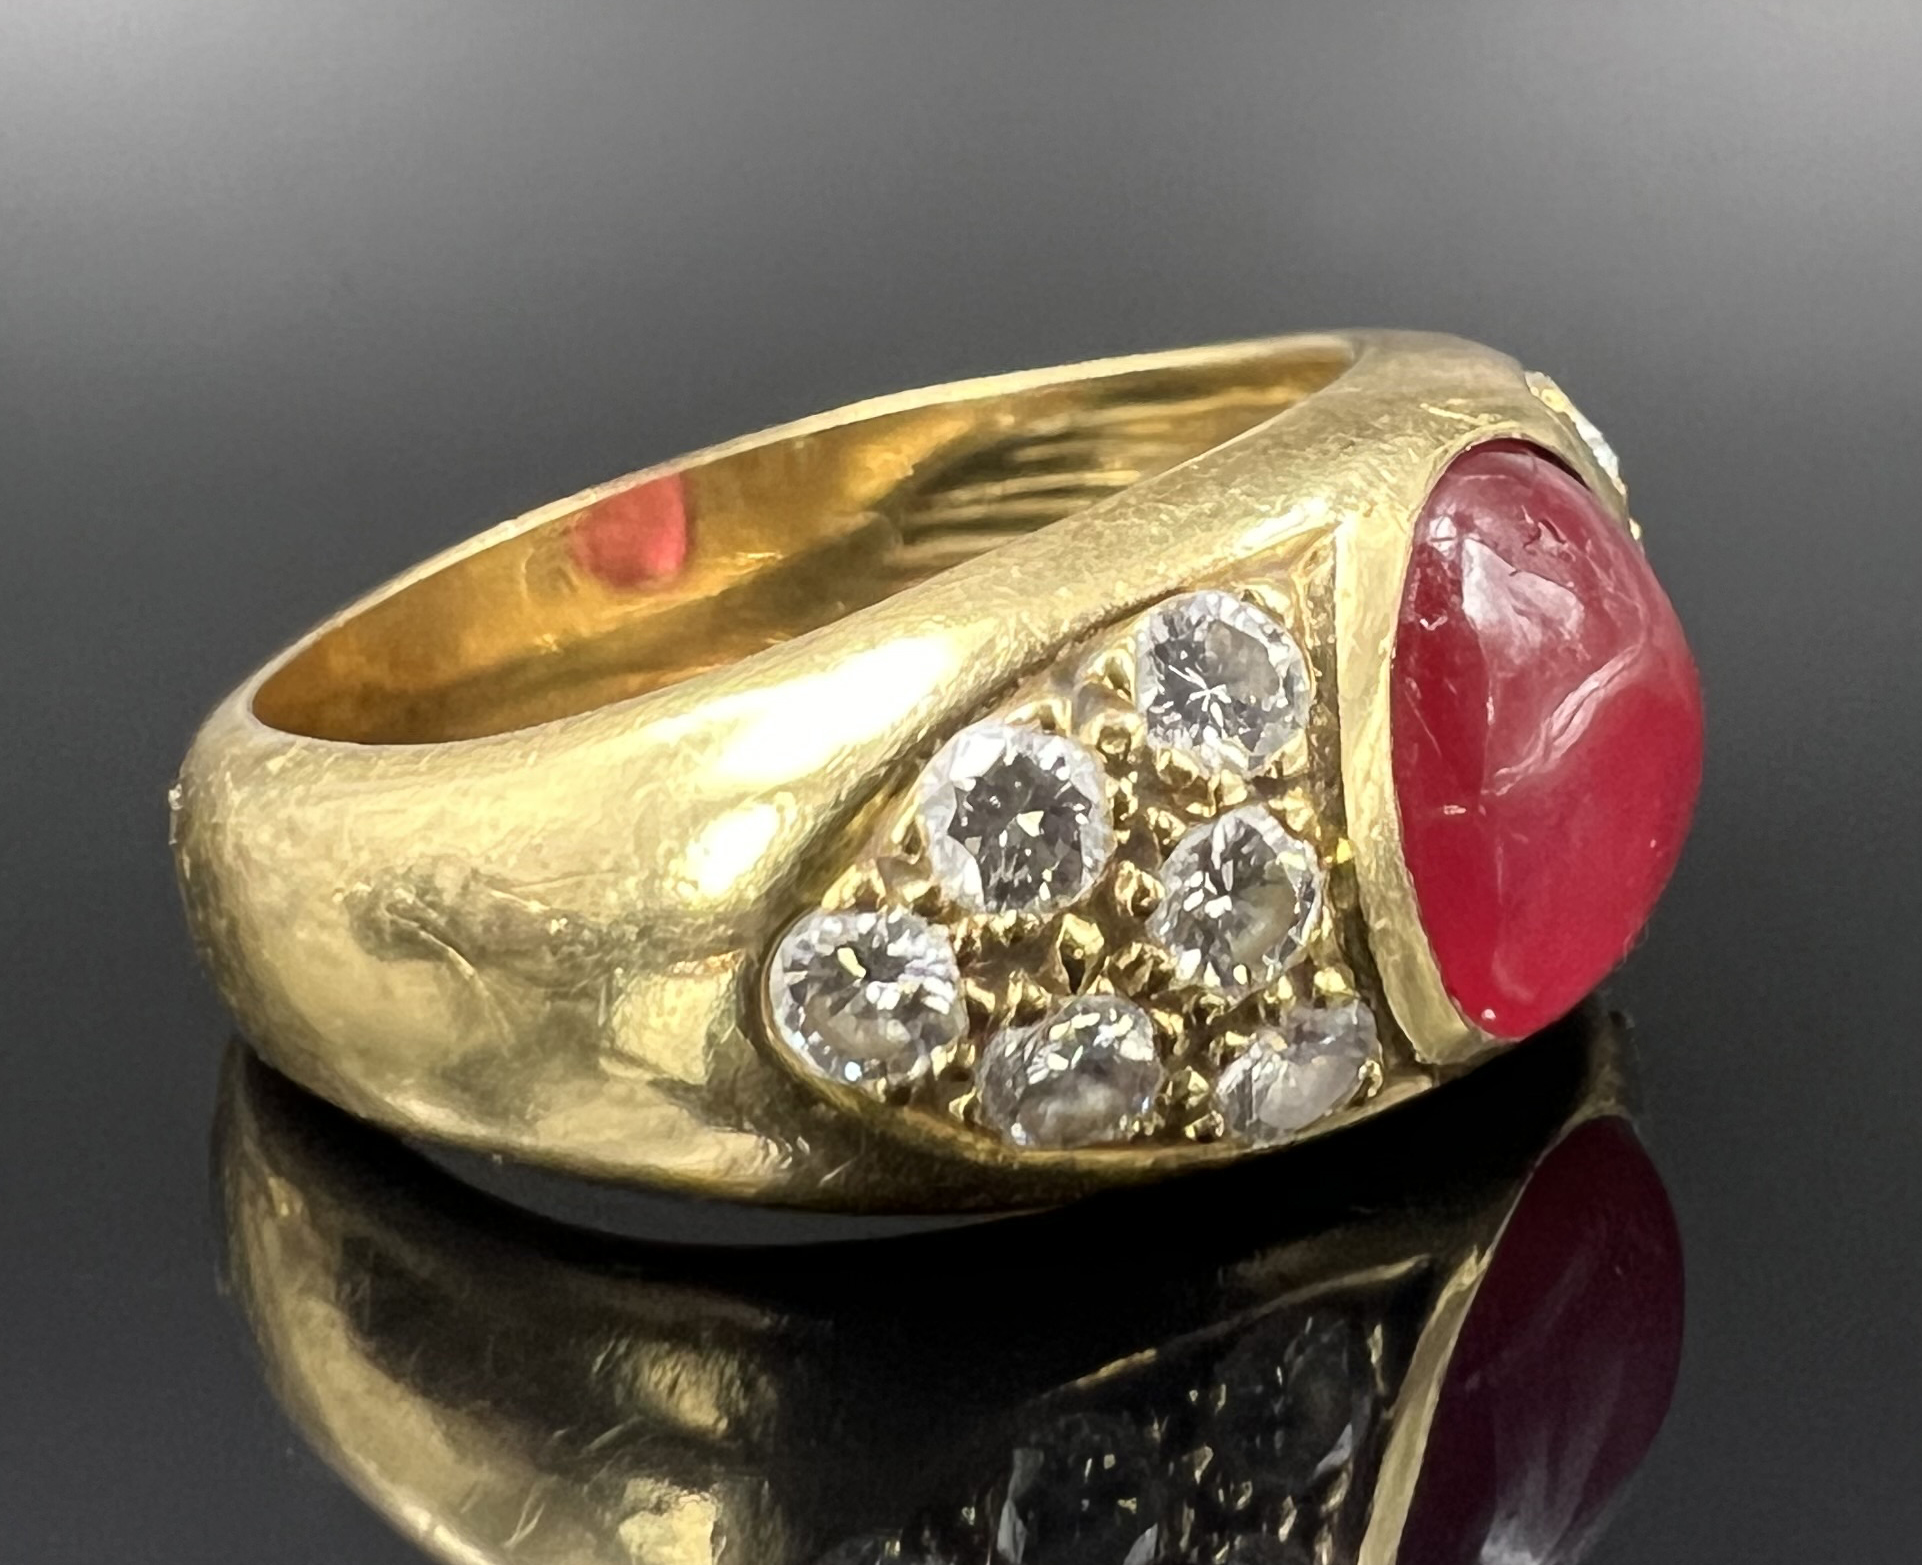 Ladies' ring. 750 yellow gold with diamonds and a red coloured stone cabochon. - Image 3 of 11